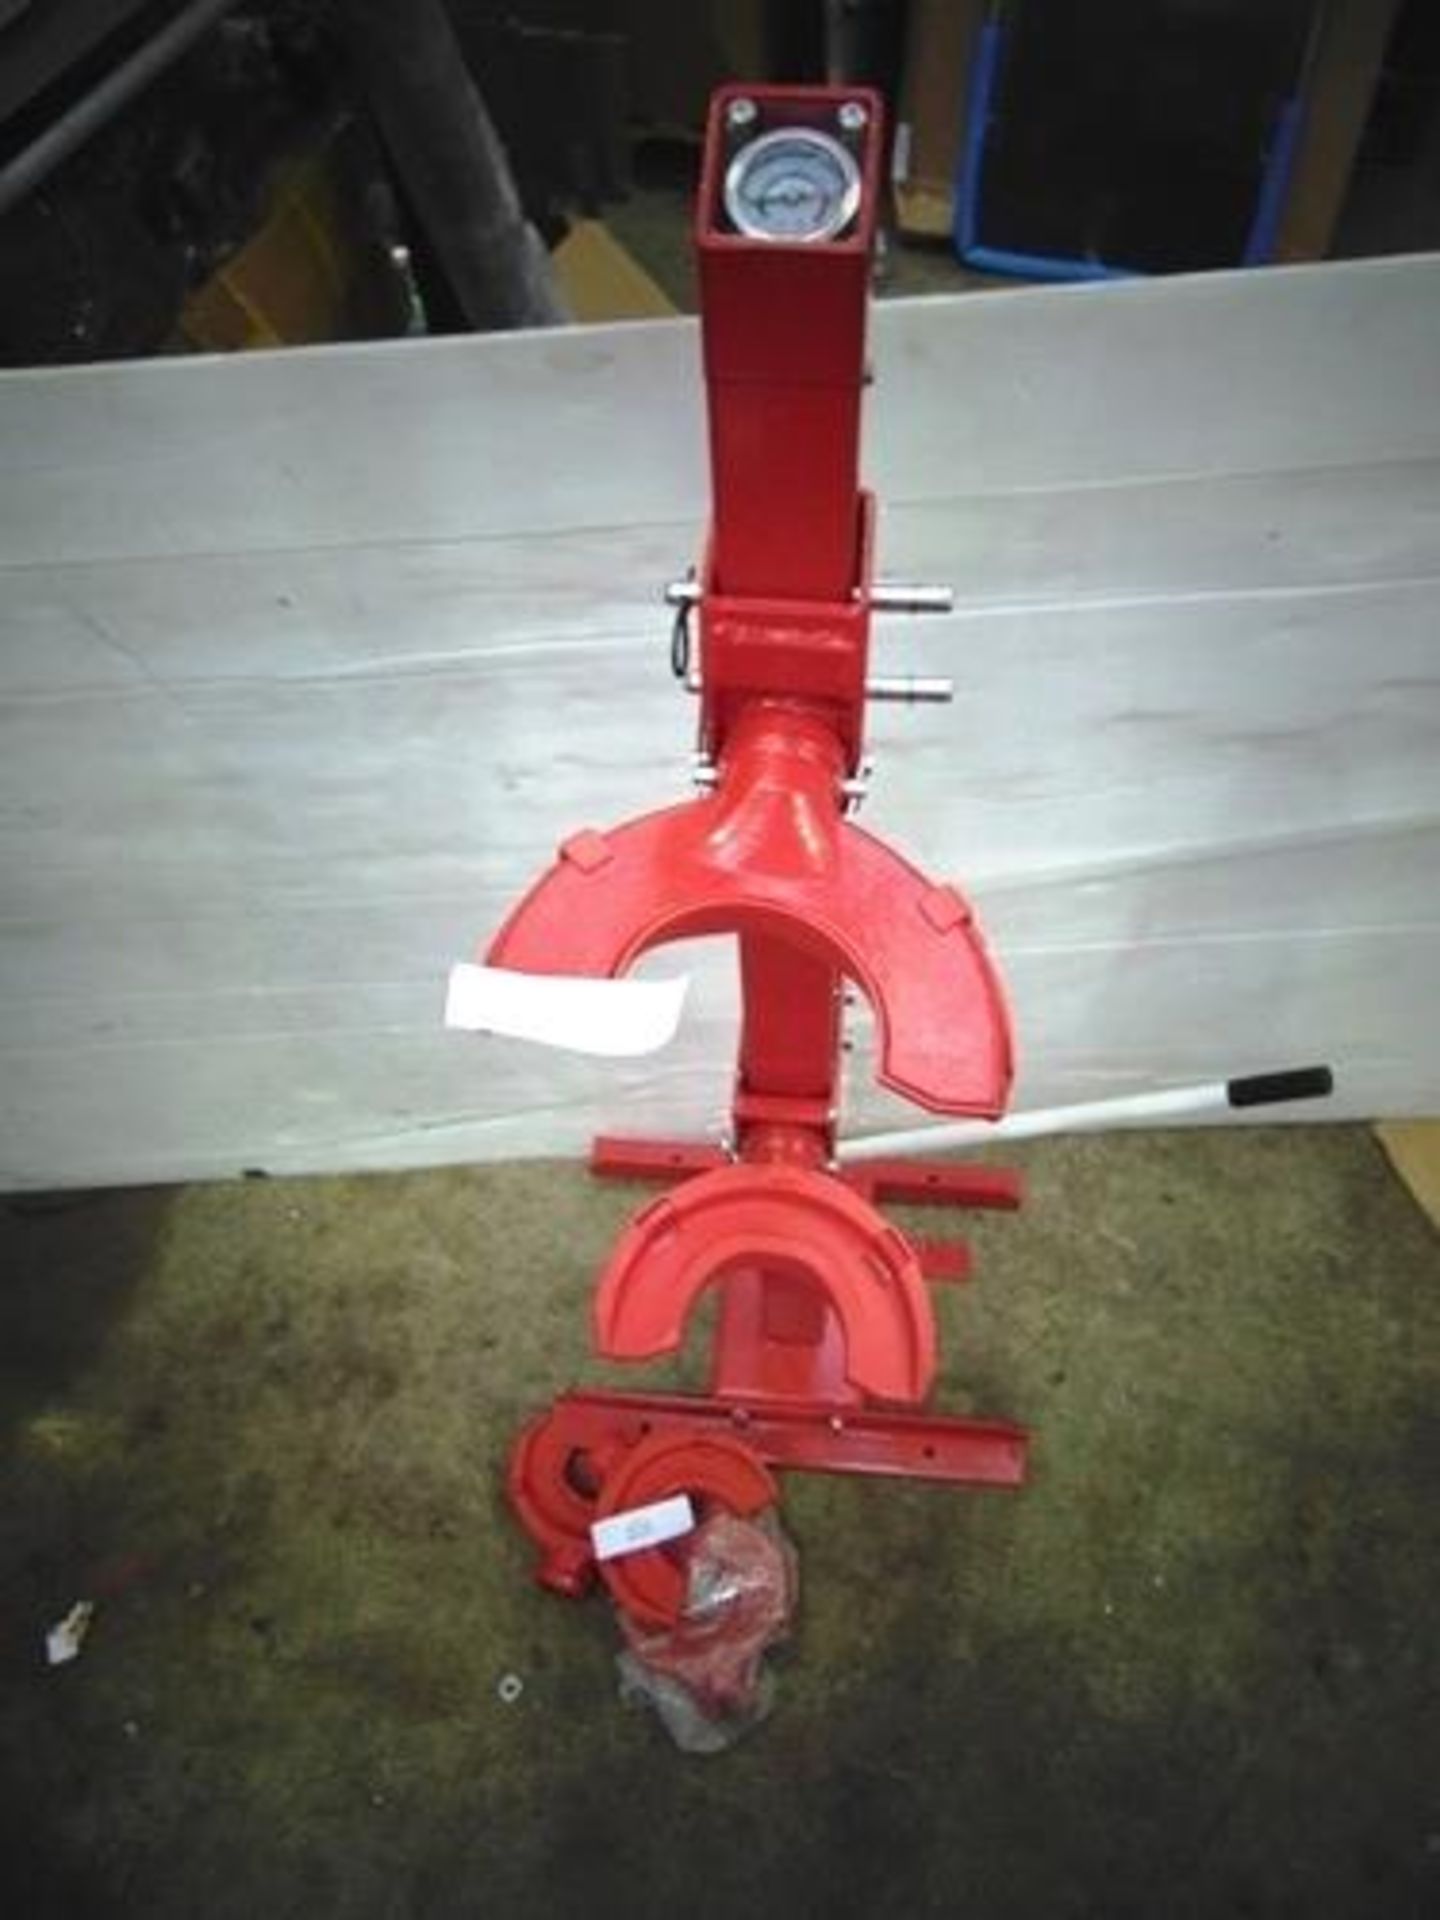 1 x Sealey 2000kg hydraulic coil spring compressor, model RE2311 with large and small cups - New (